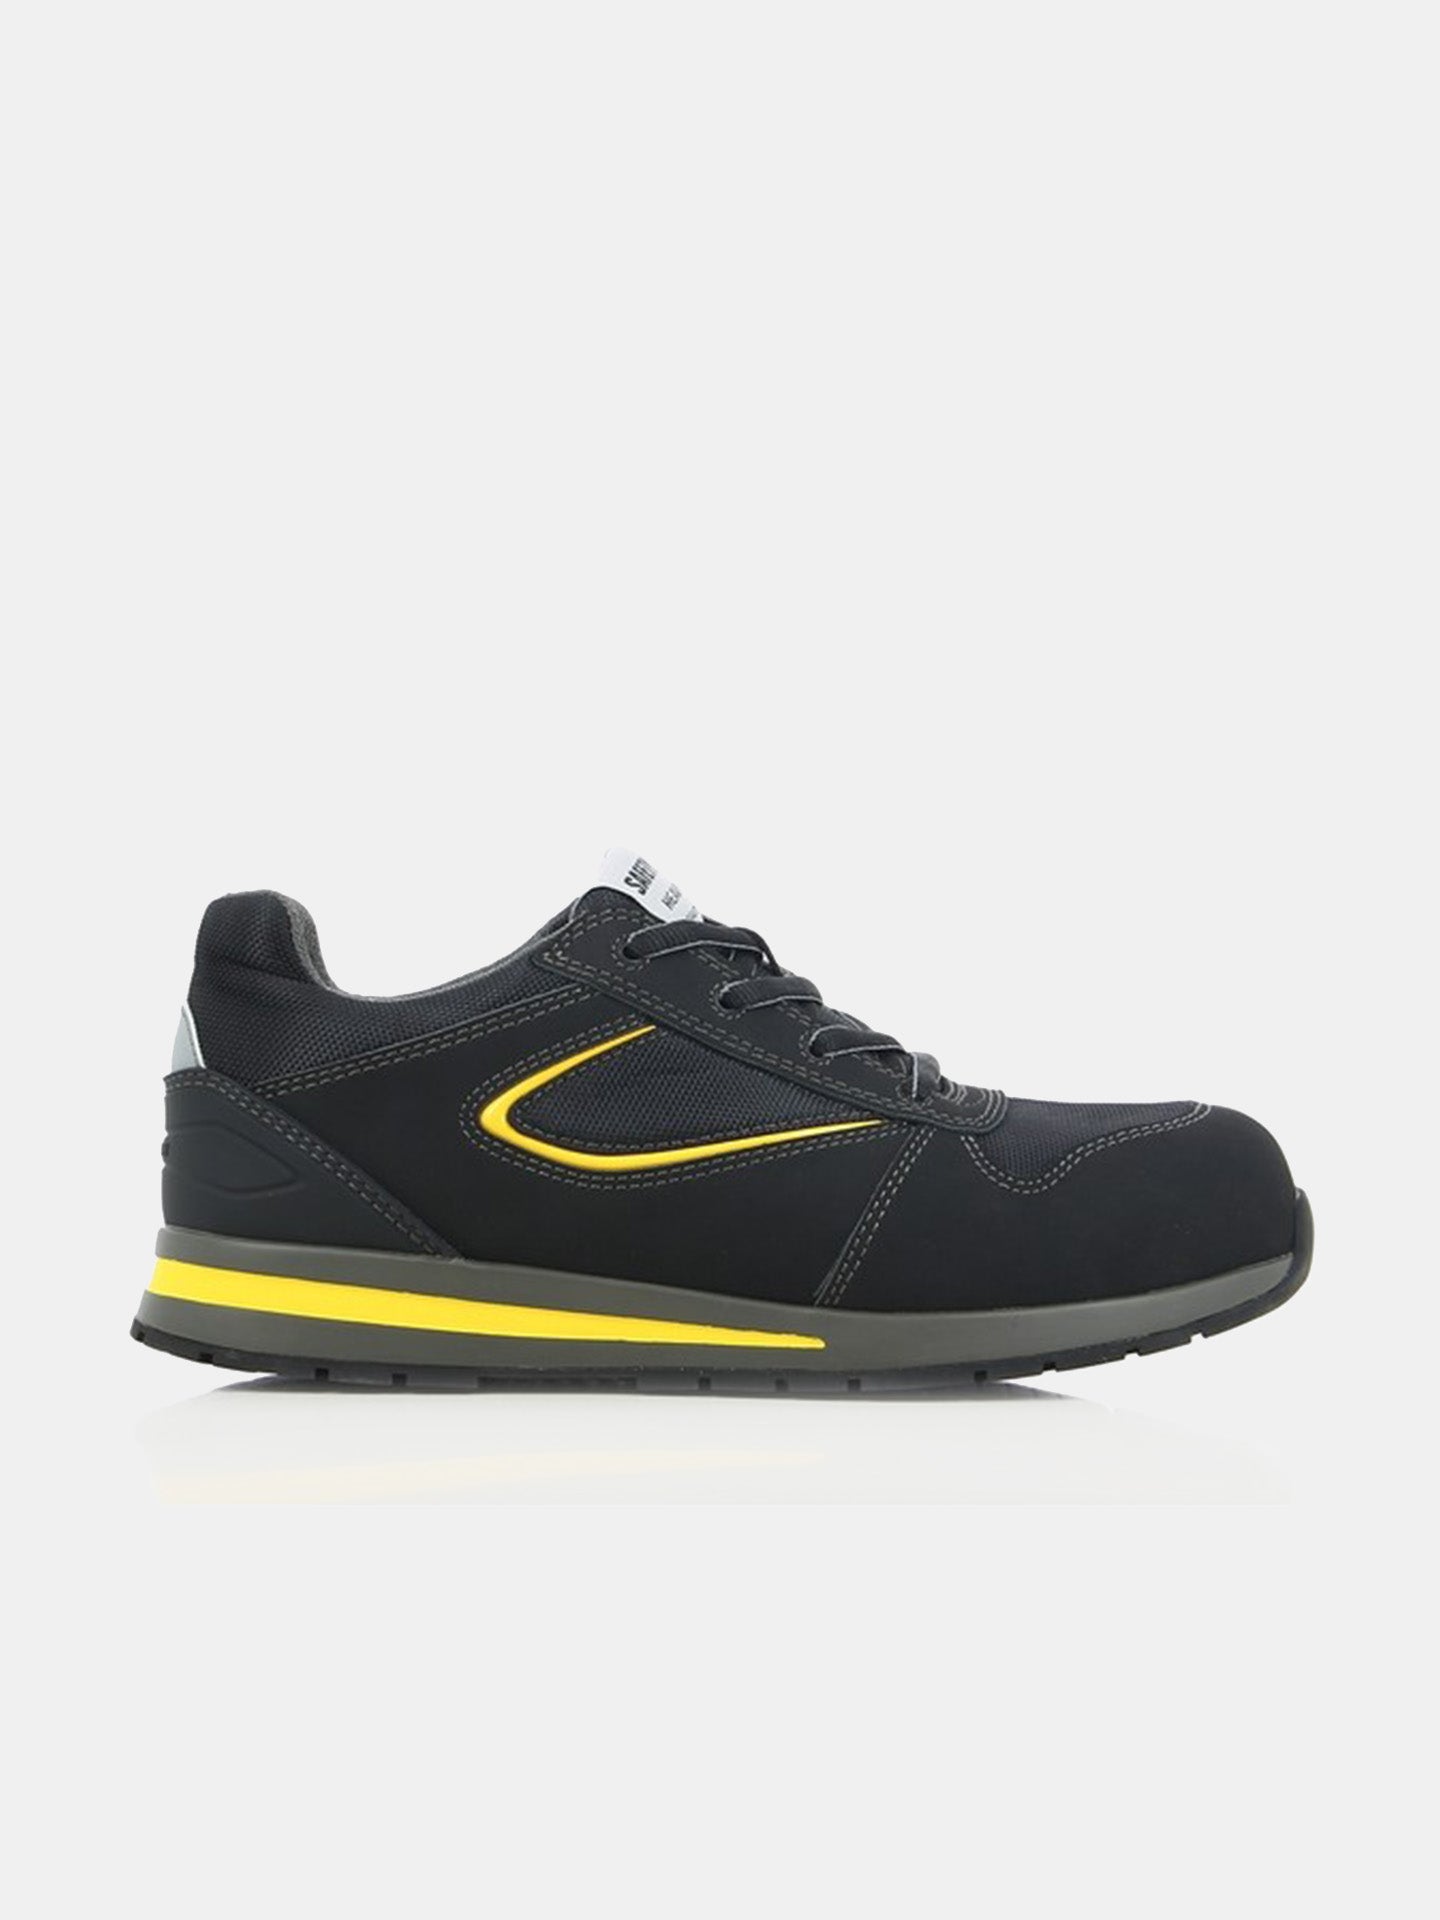 Safety Jogger Sports Turbo S3 SRC HRO Shoes #color_Yellow